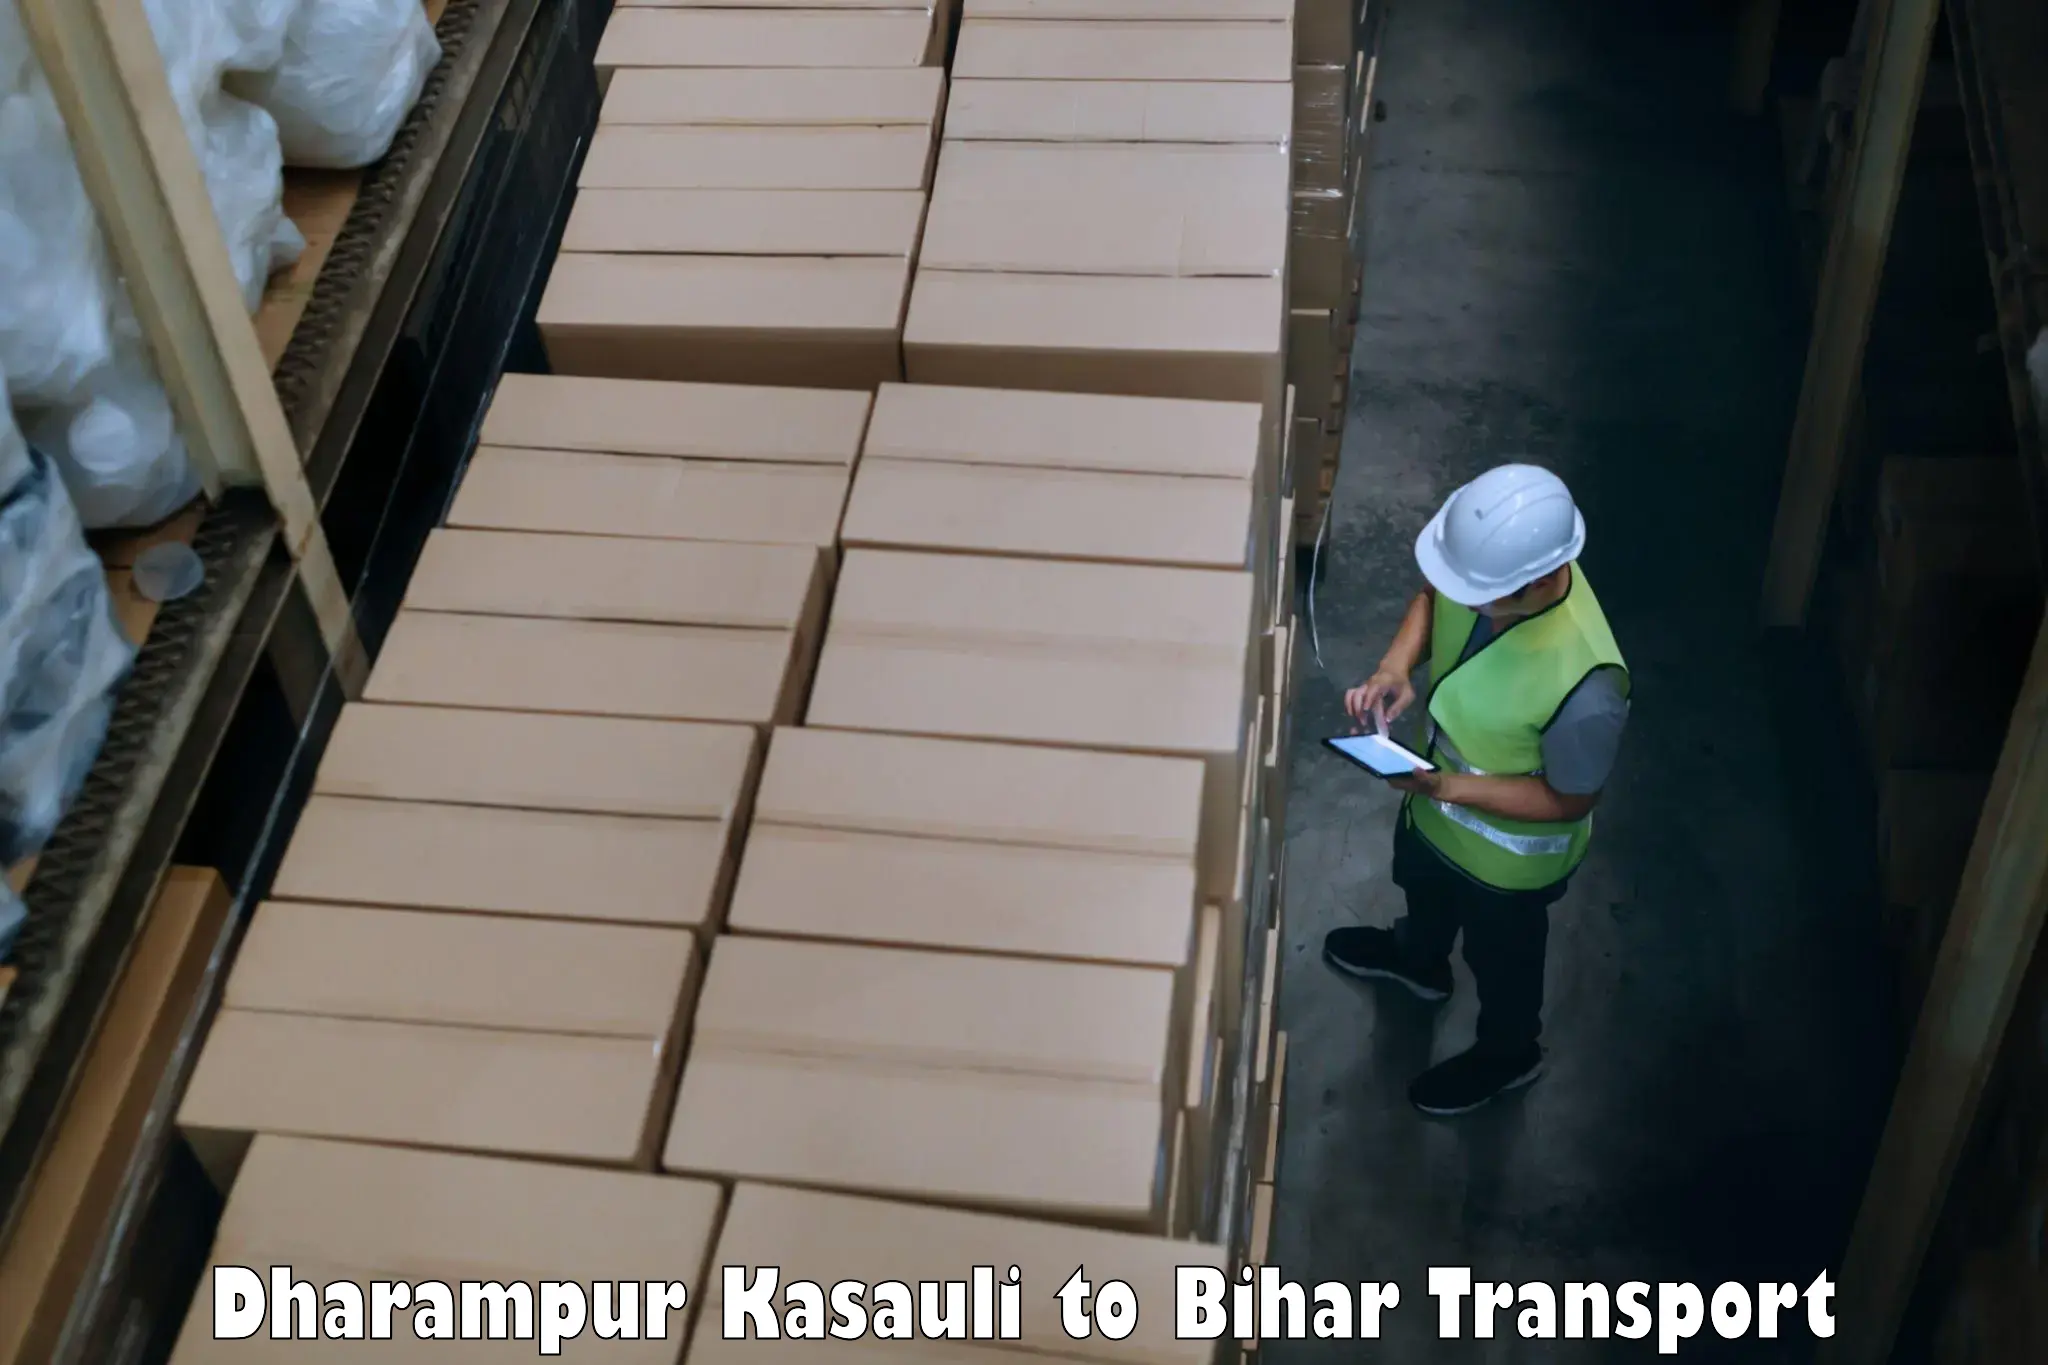 Part load transport service in India in Dharampur Kasauli to Laheriasarai